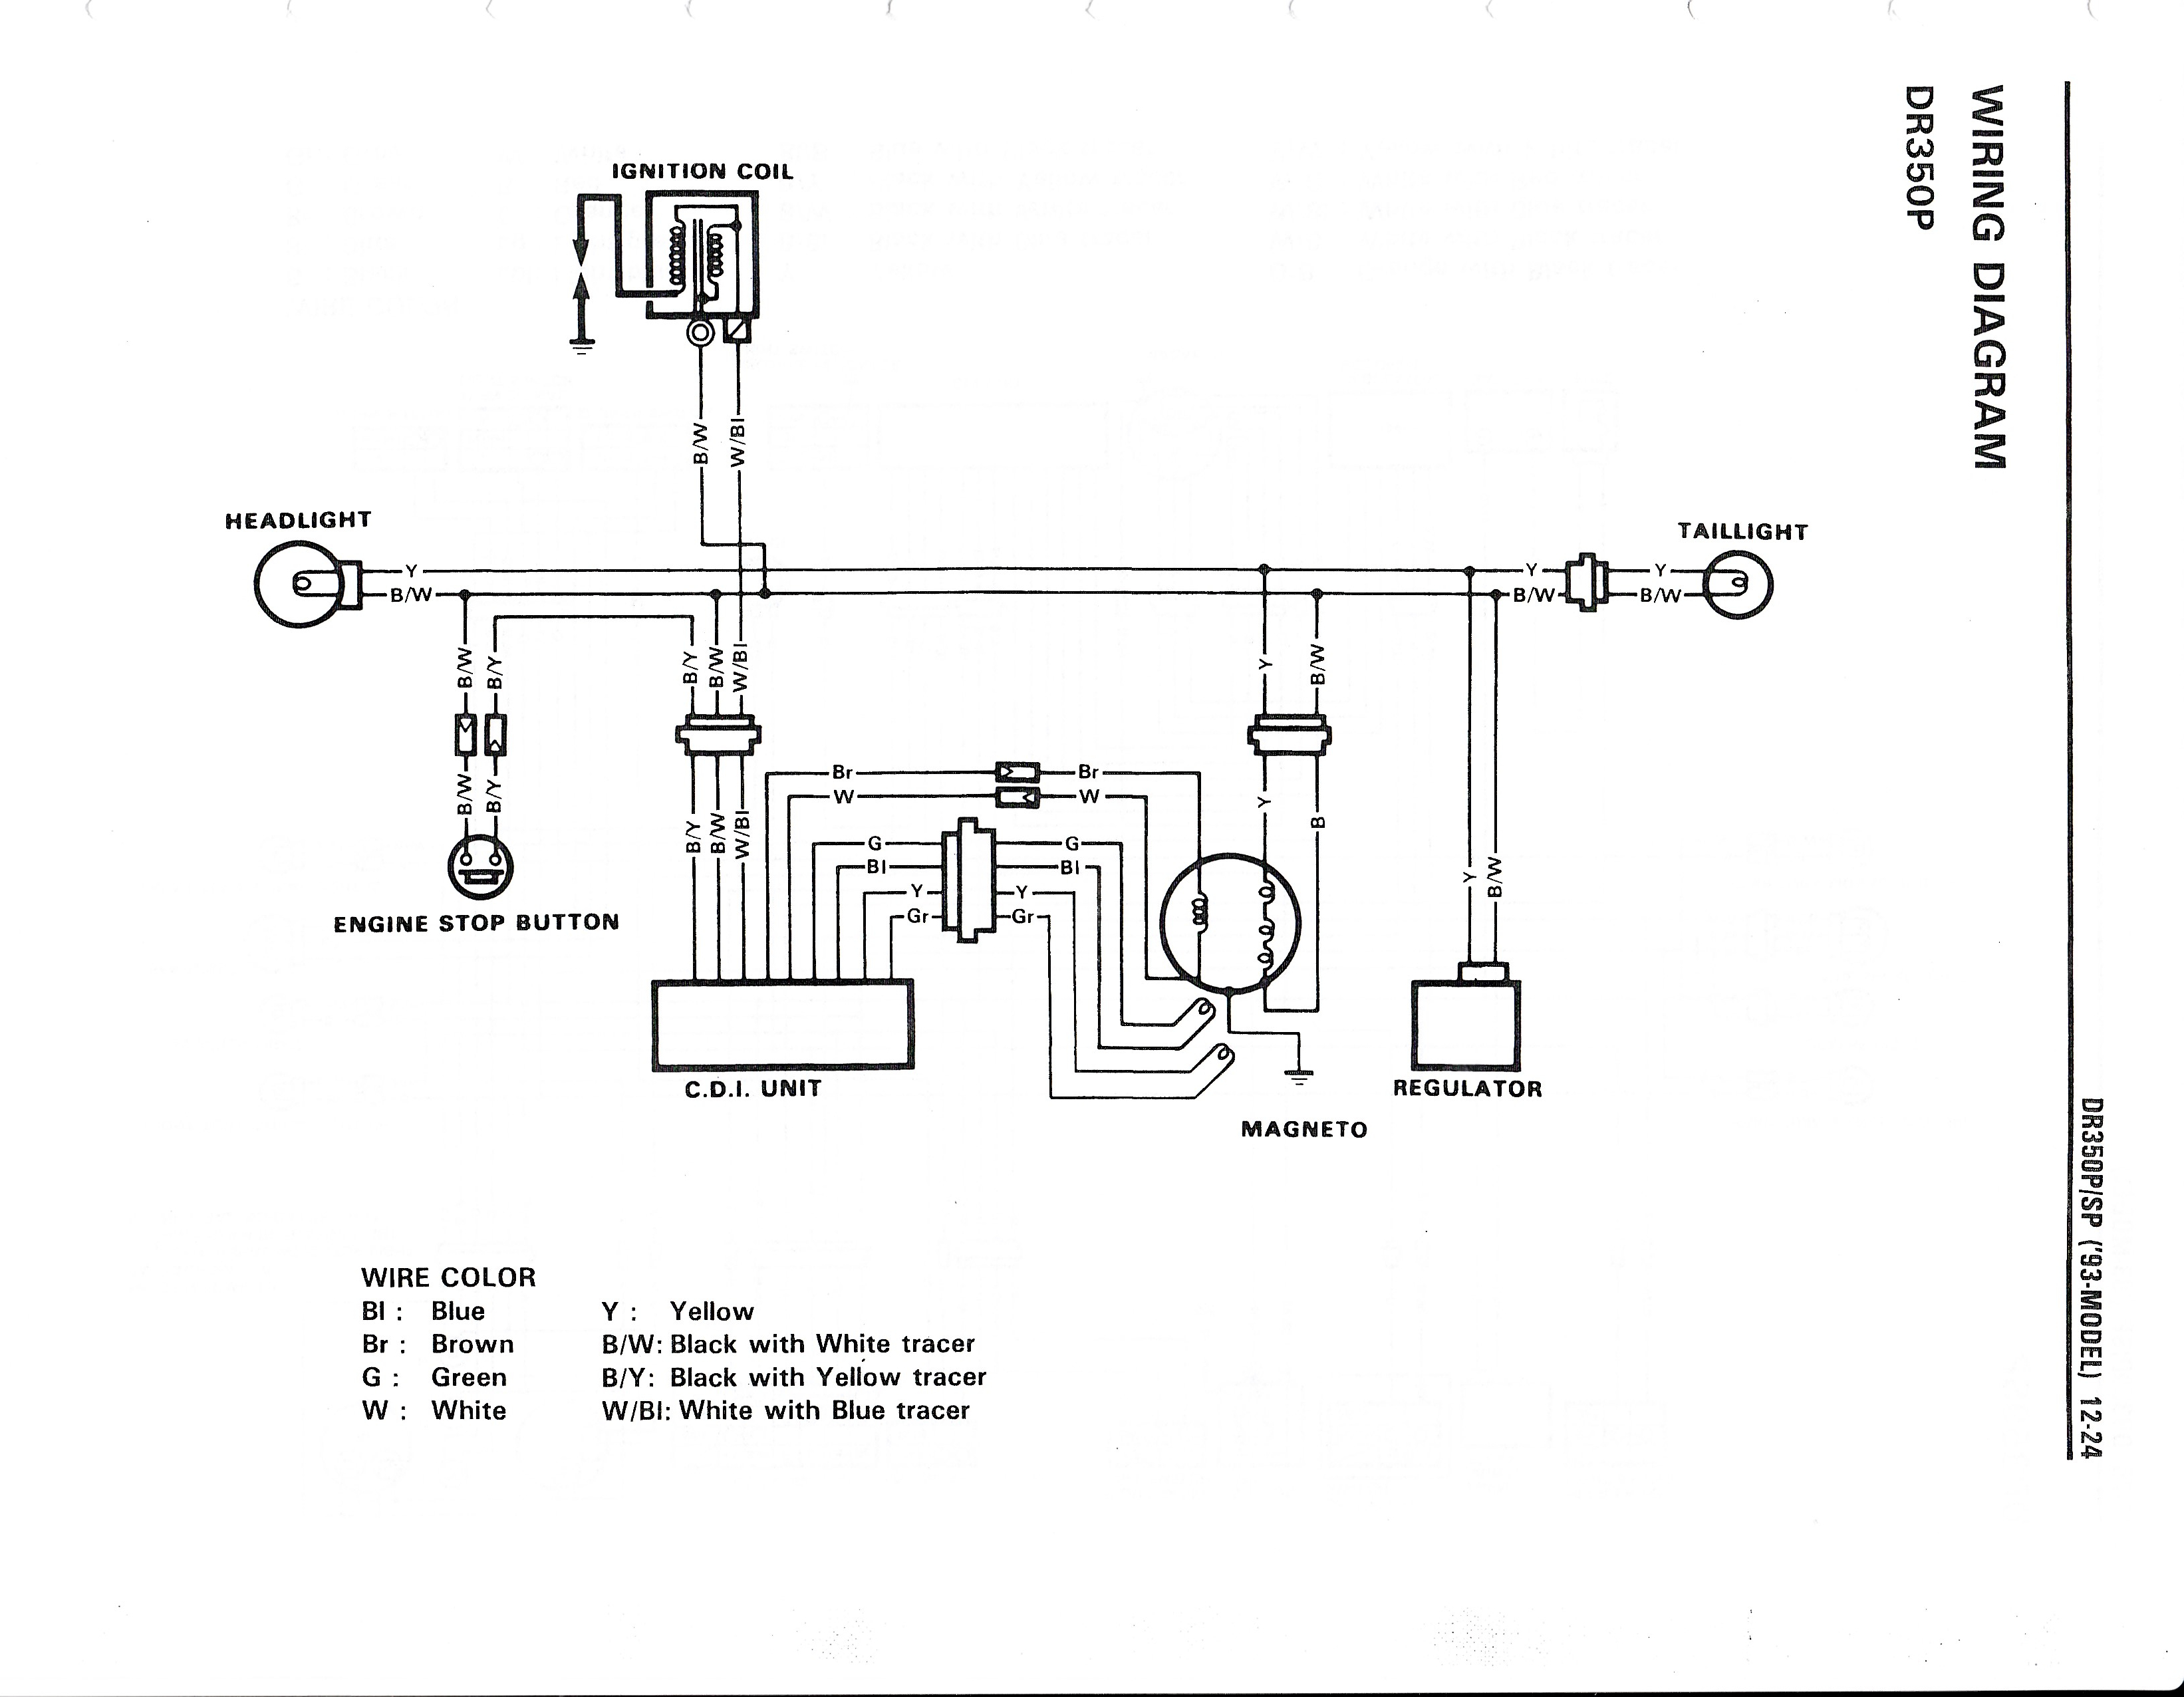 Wiring diagram for the DR350 (1993 and later models)